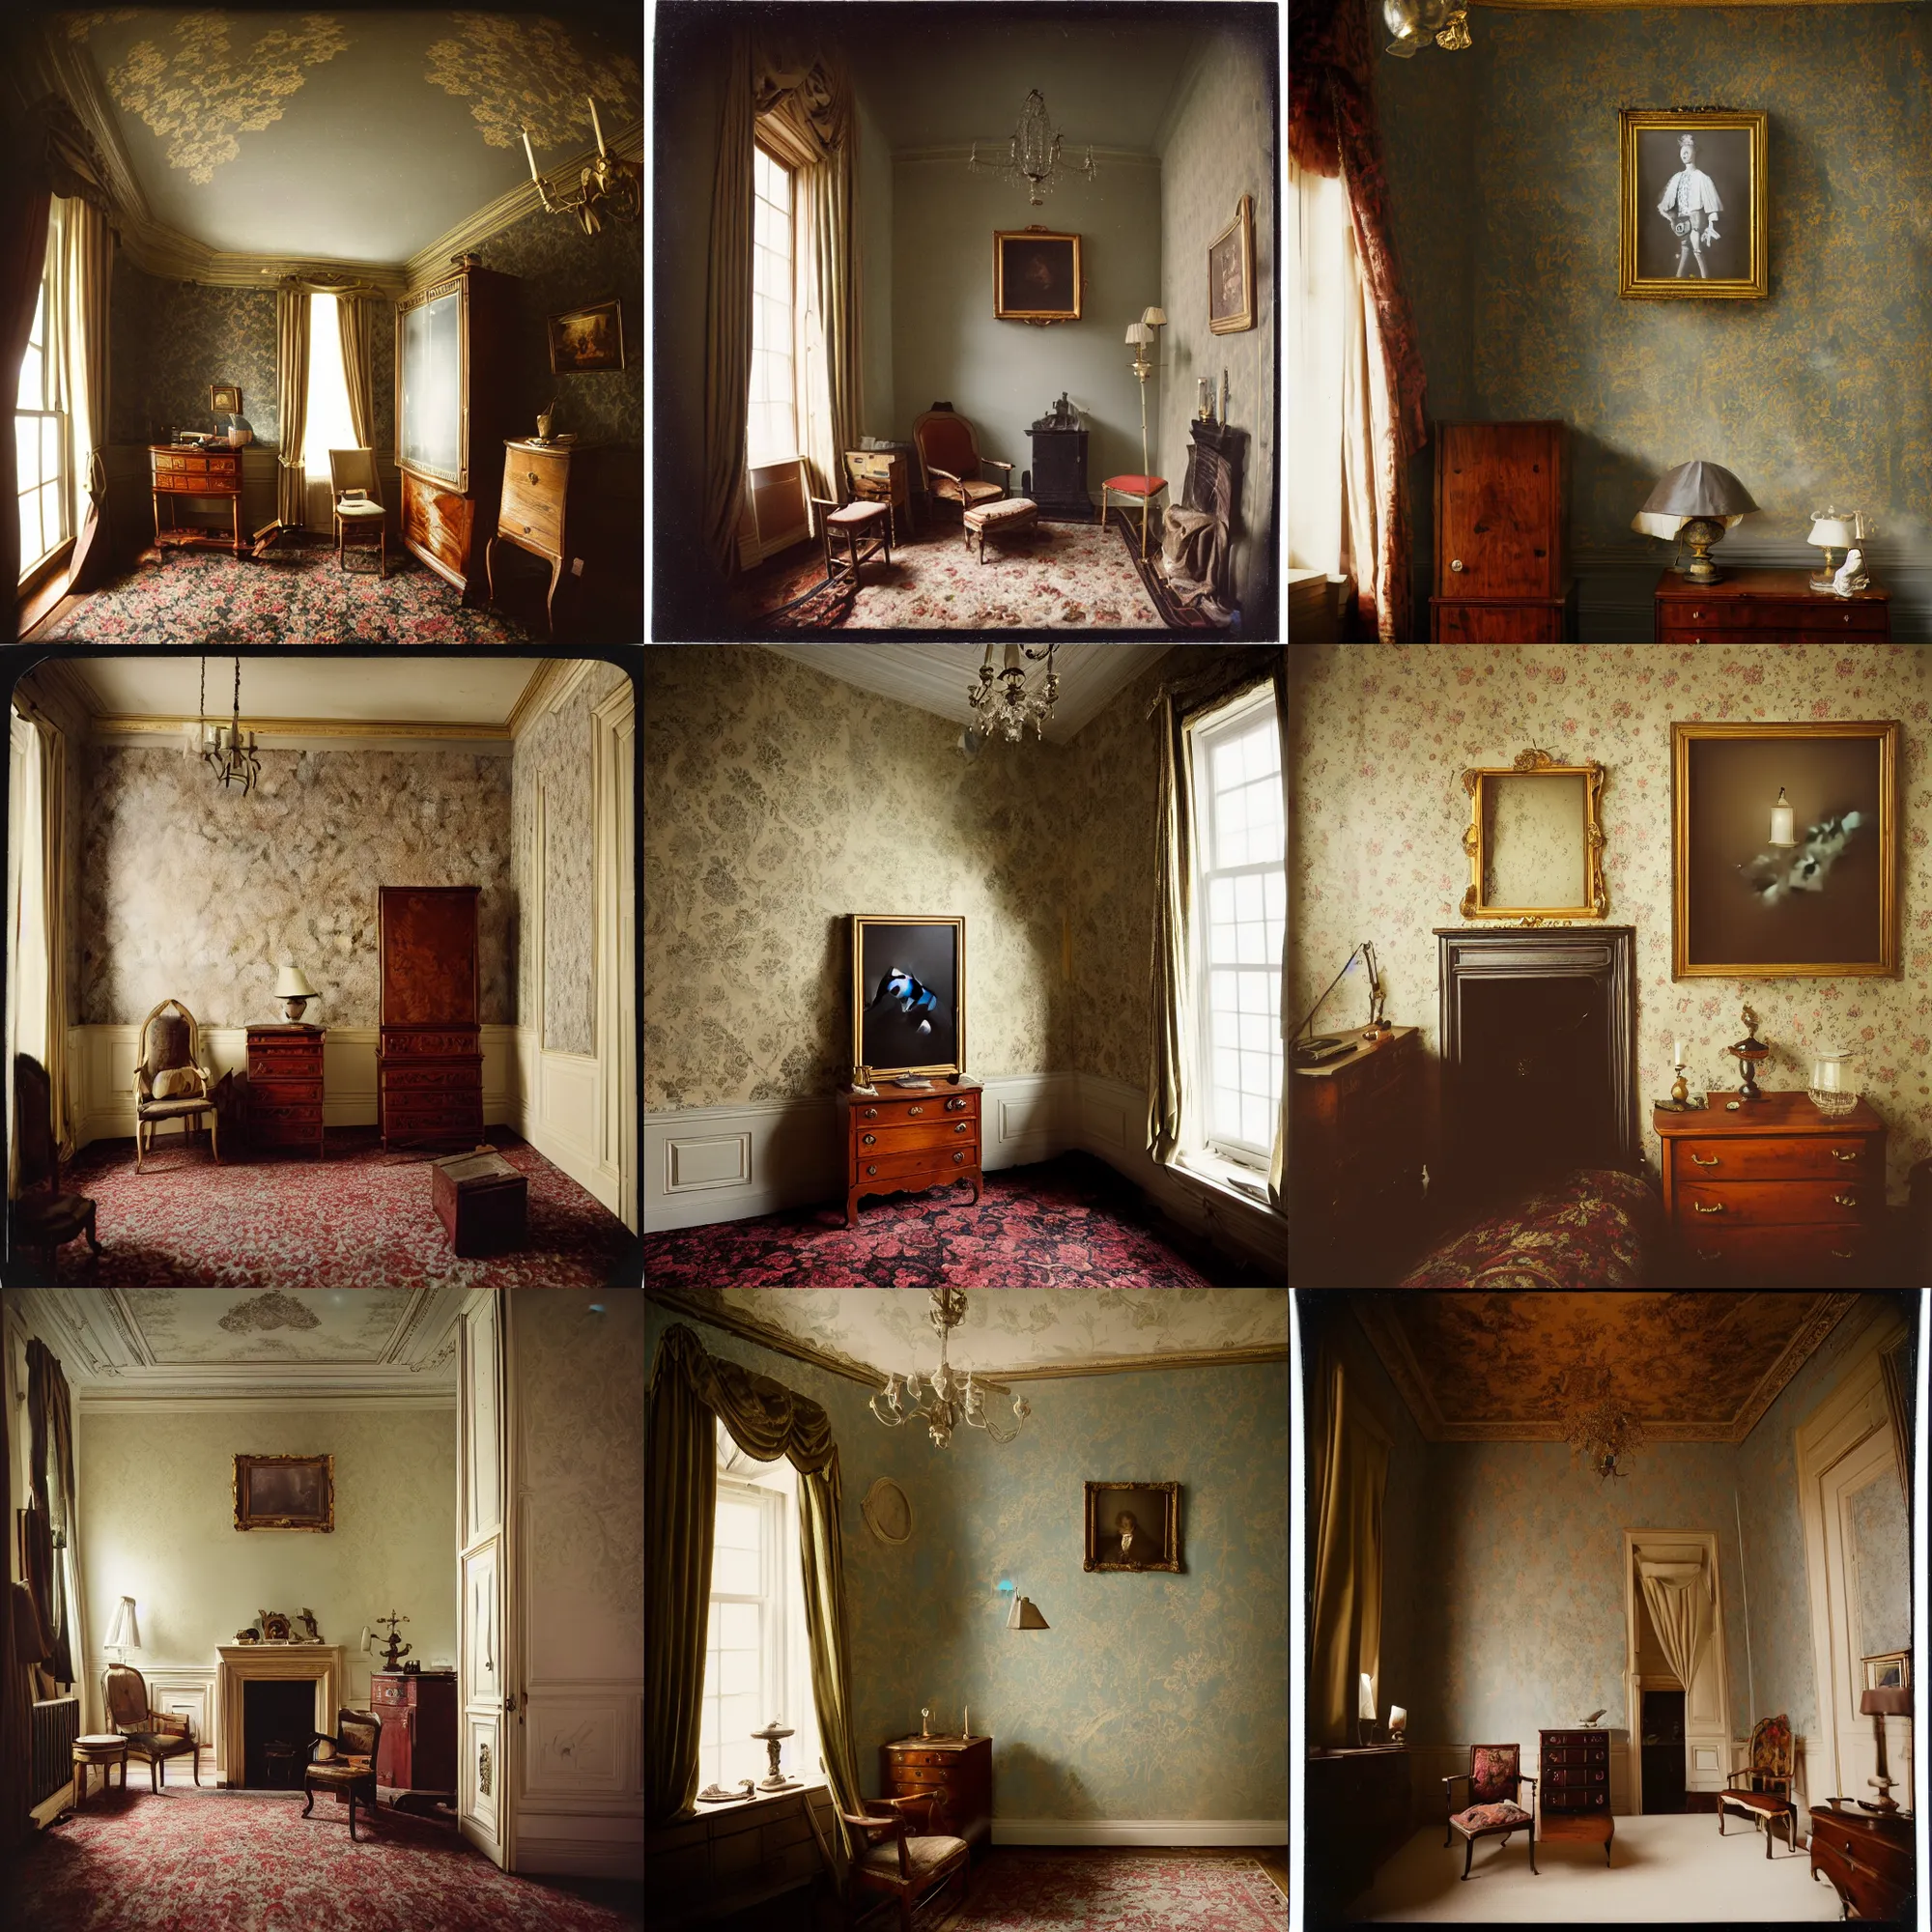 Prompt: kodak portra 4 0 0, wetplate, 8 mm extreme fisheye, award - winning portrait by britt marling of a 1 7 5 0 s room, picture frames, shining lamps, dust, smoke 1 7 5 0 s furniture, wallpaper, carpet, interior, muted colours, fog